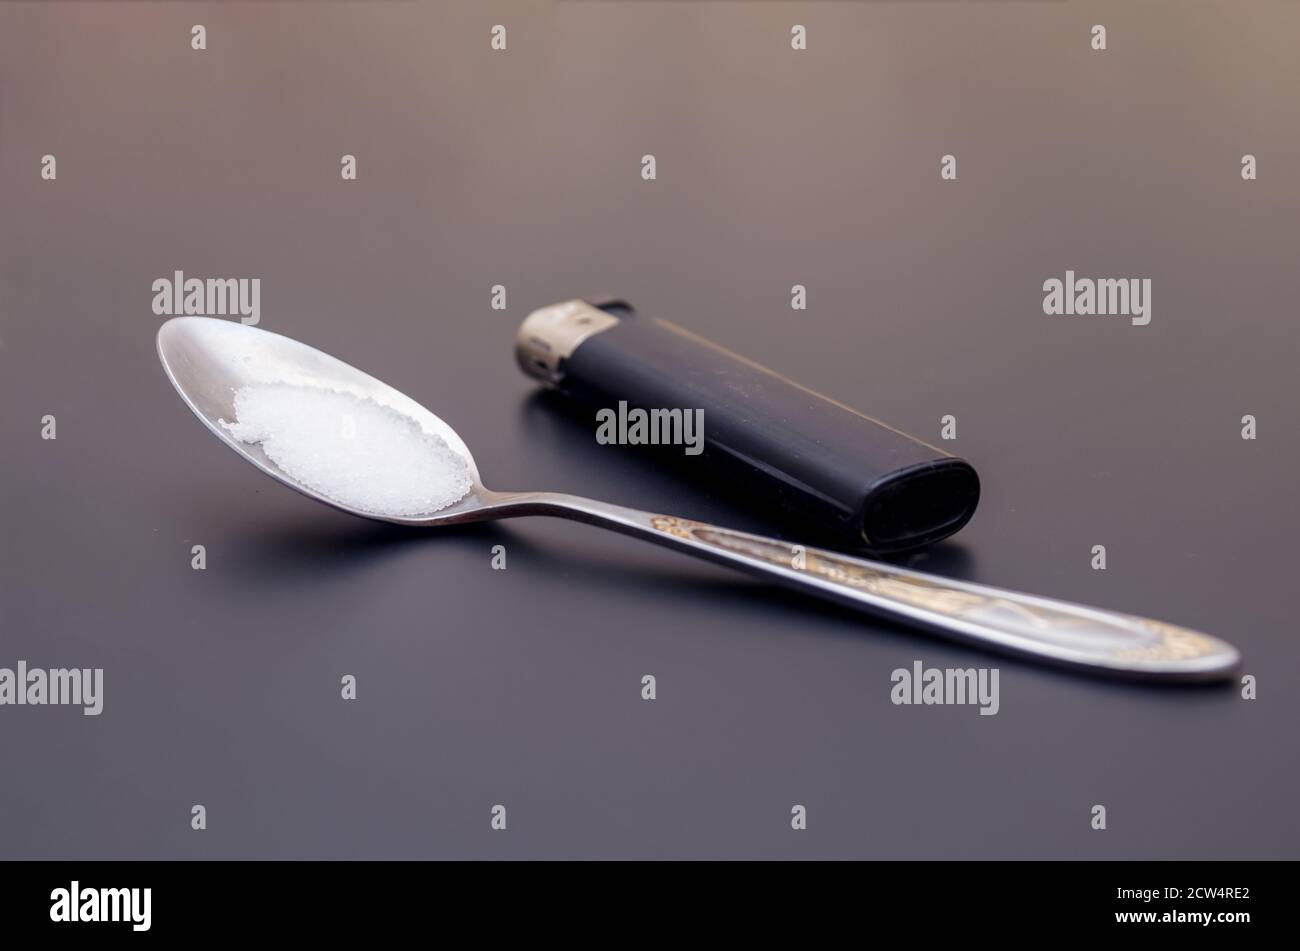 spoon with drugs for heroin cooking on dark table. Drug addiction concept Stock Photo